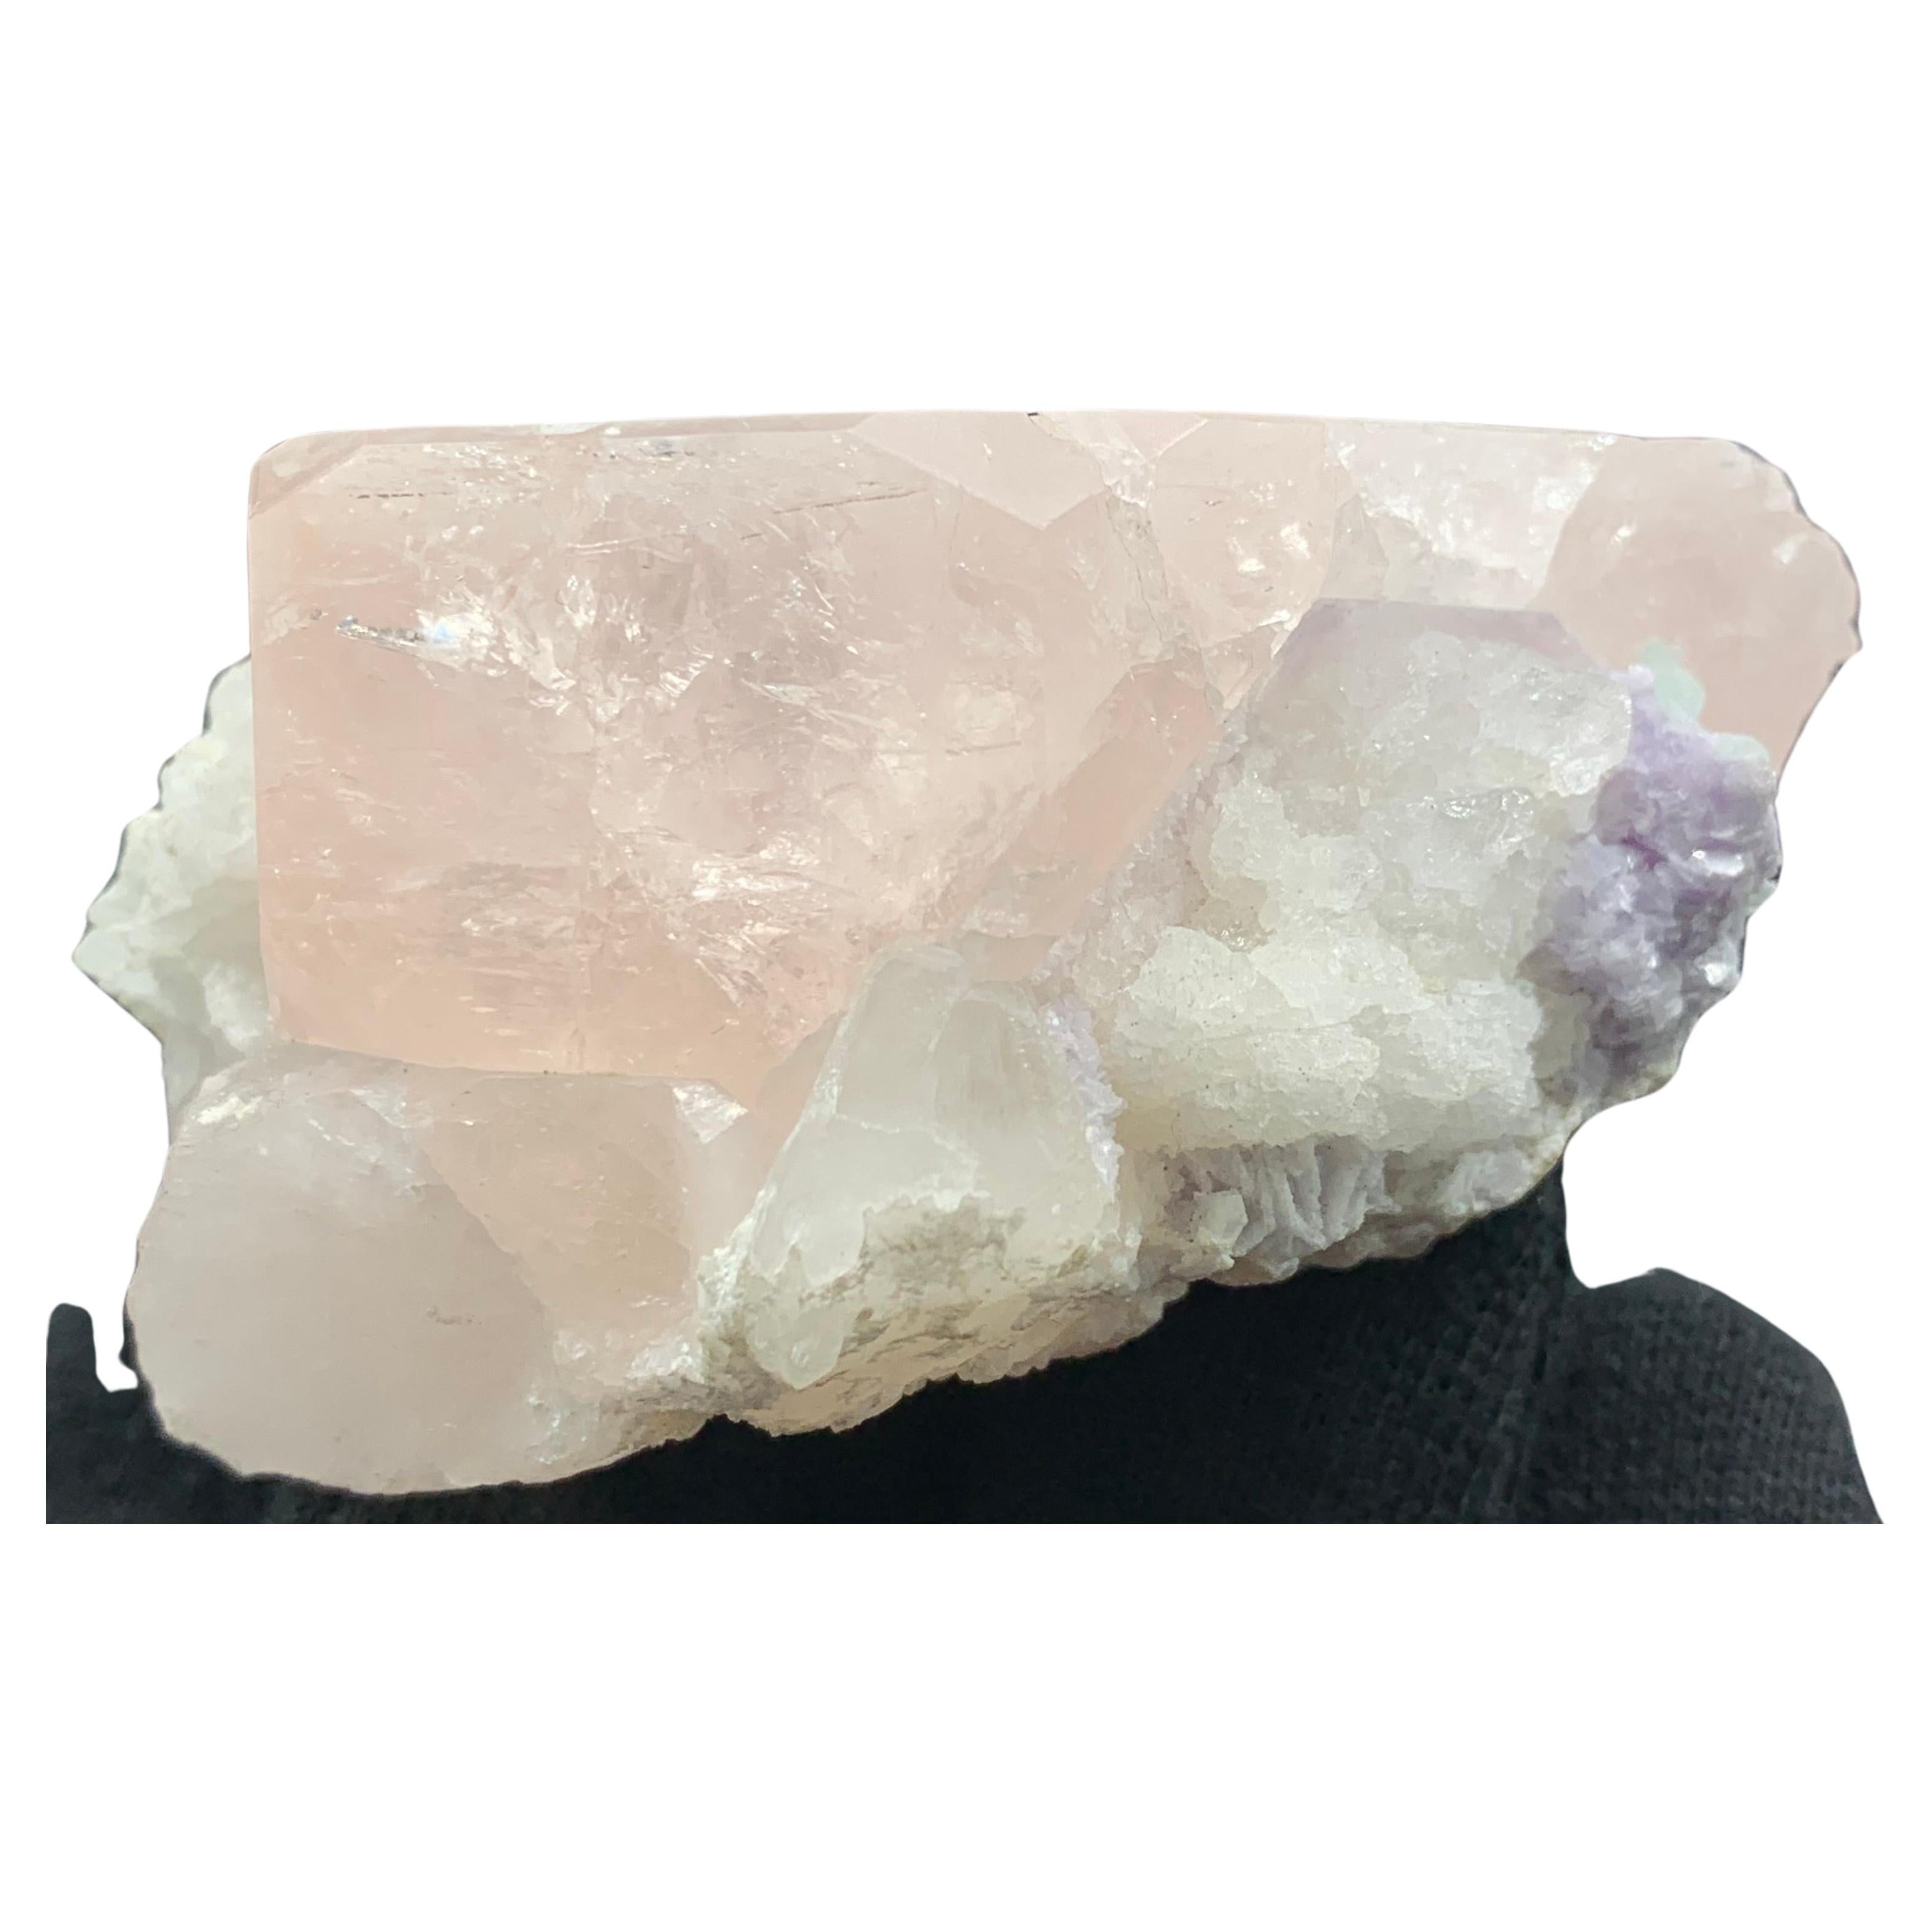 160.04 Gram Gorgeous Morganite Specimen Attached With Albite And Fluorite  For Sale